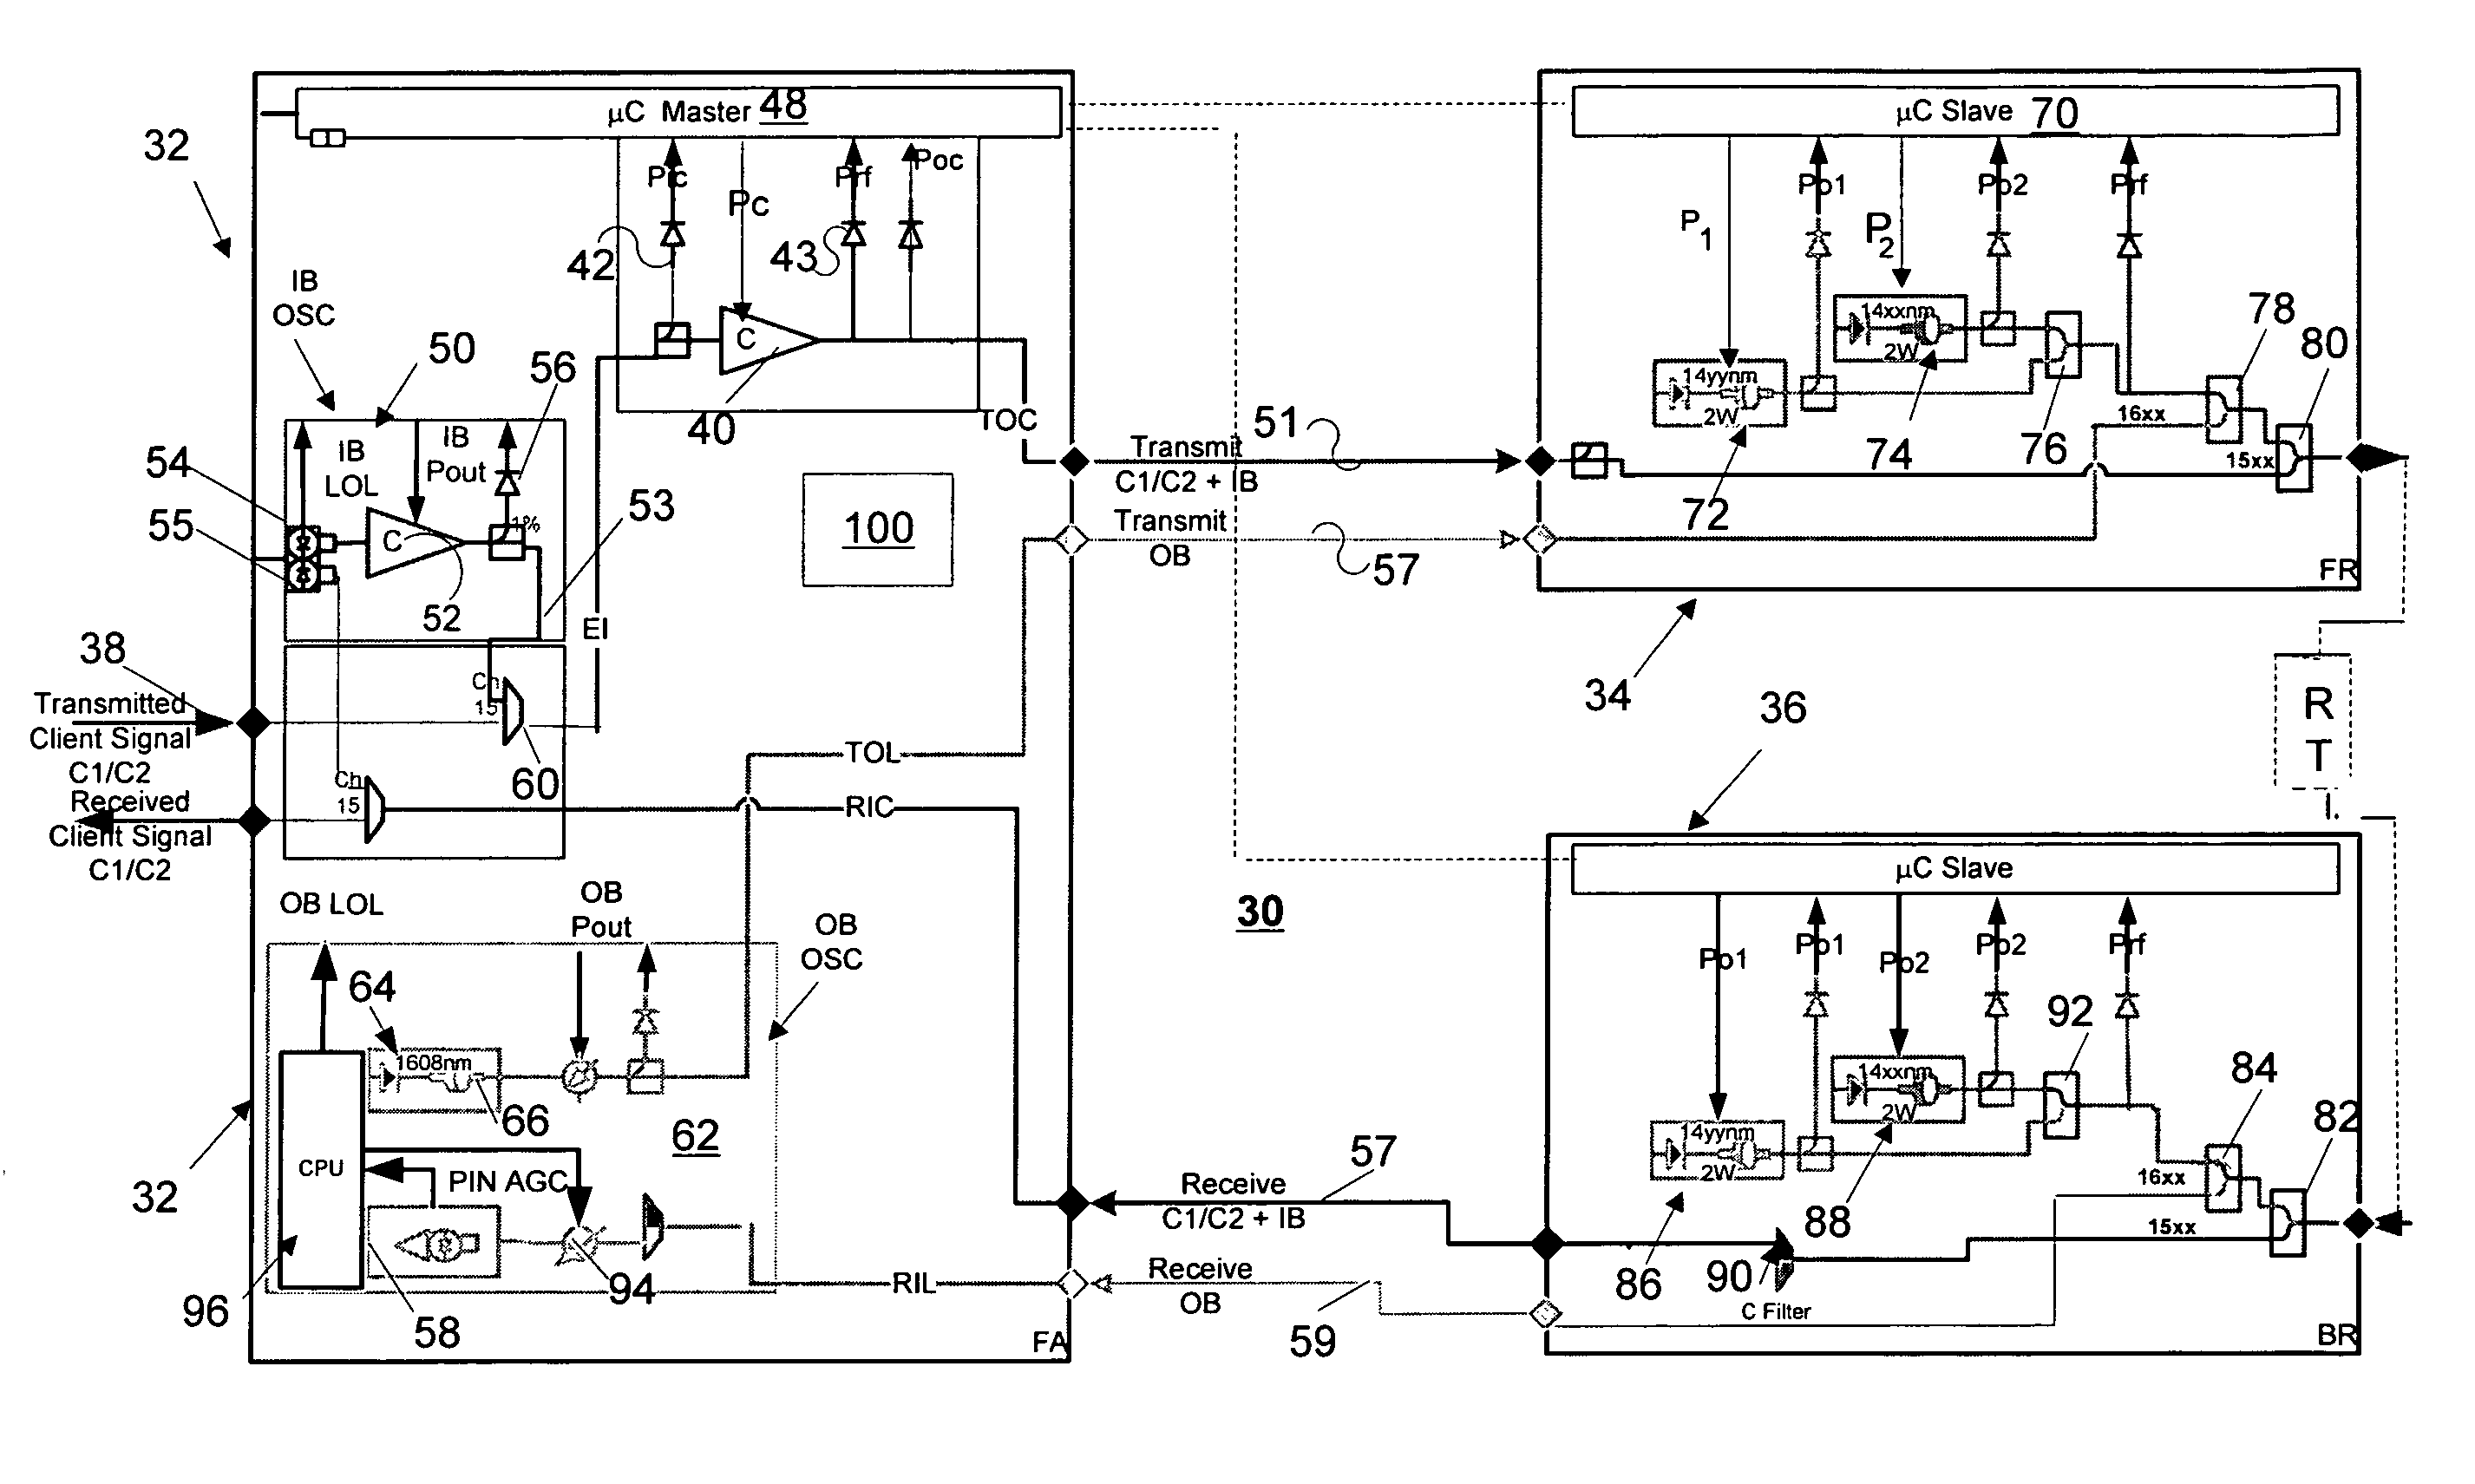 Fiber optic communication system with automatic line shutdown/power reduction